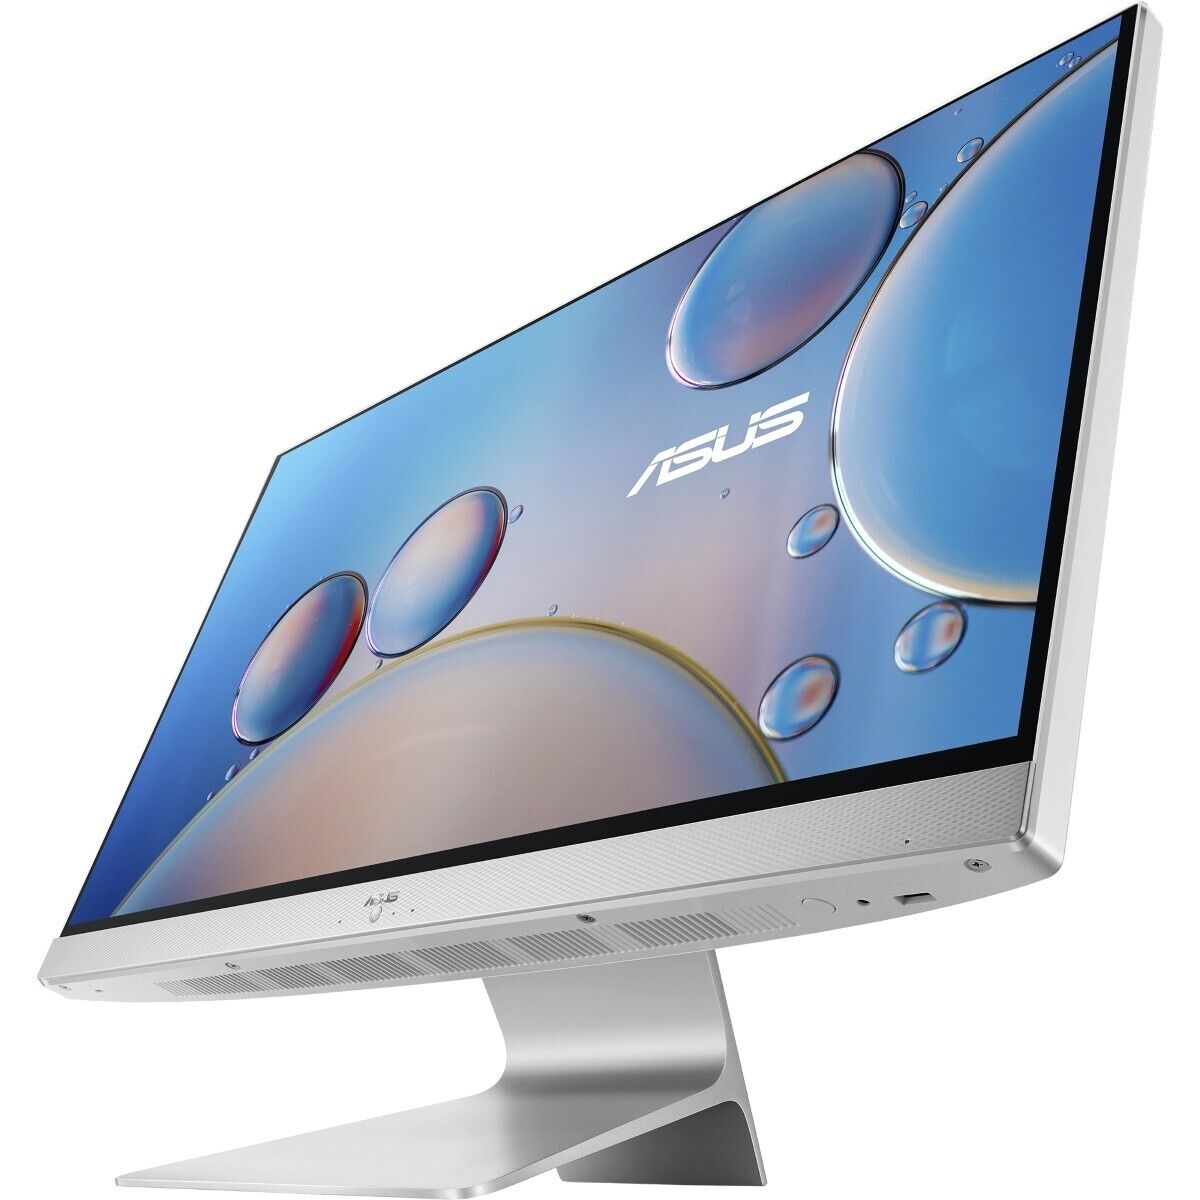 ASUS All-in-one PC M3700 27in Display AMD Ryzen 5 CPU 8GB Memory 512GB Storage